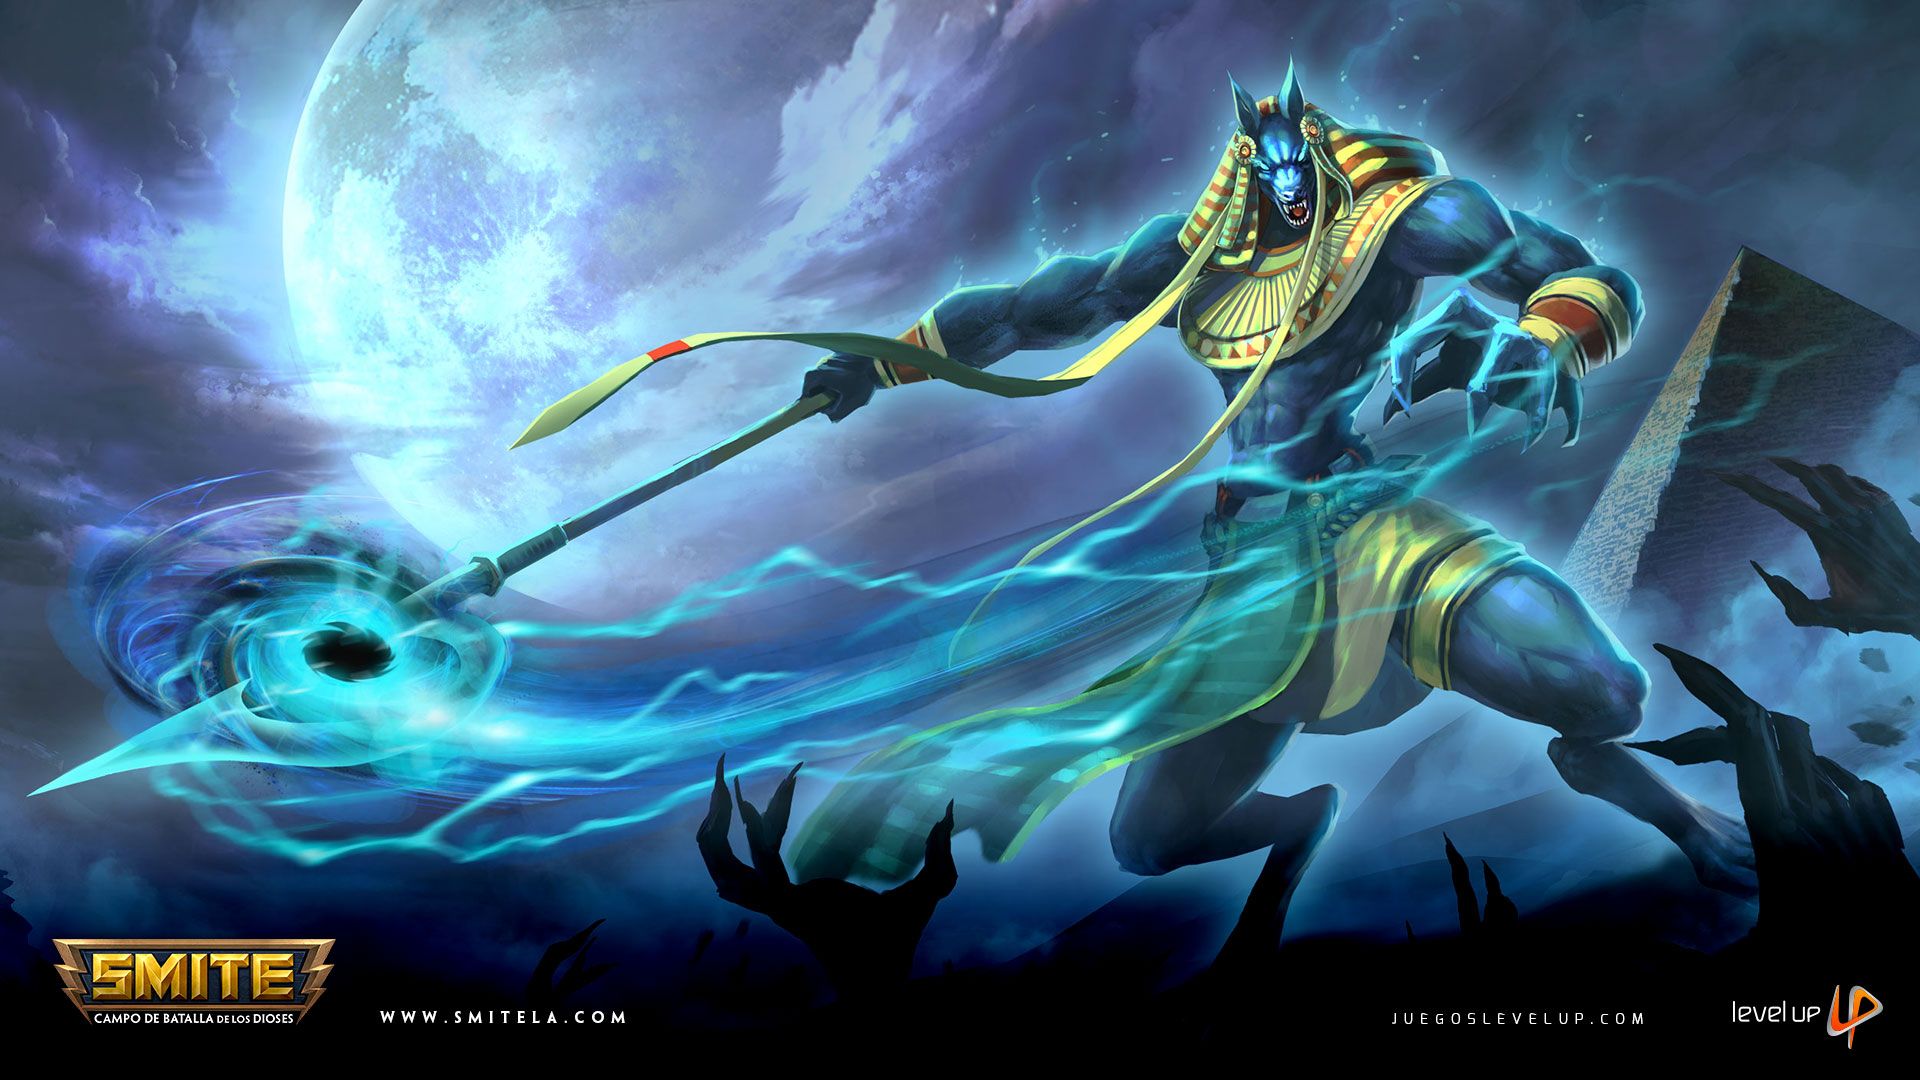 Smite Wallpaper. Smite Awesome Photo Collection